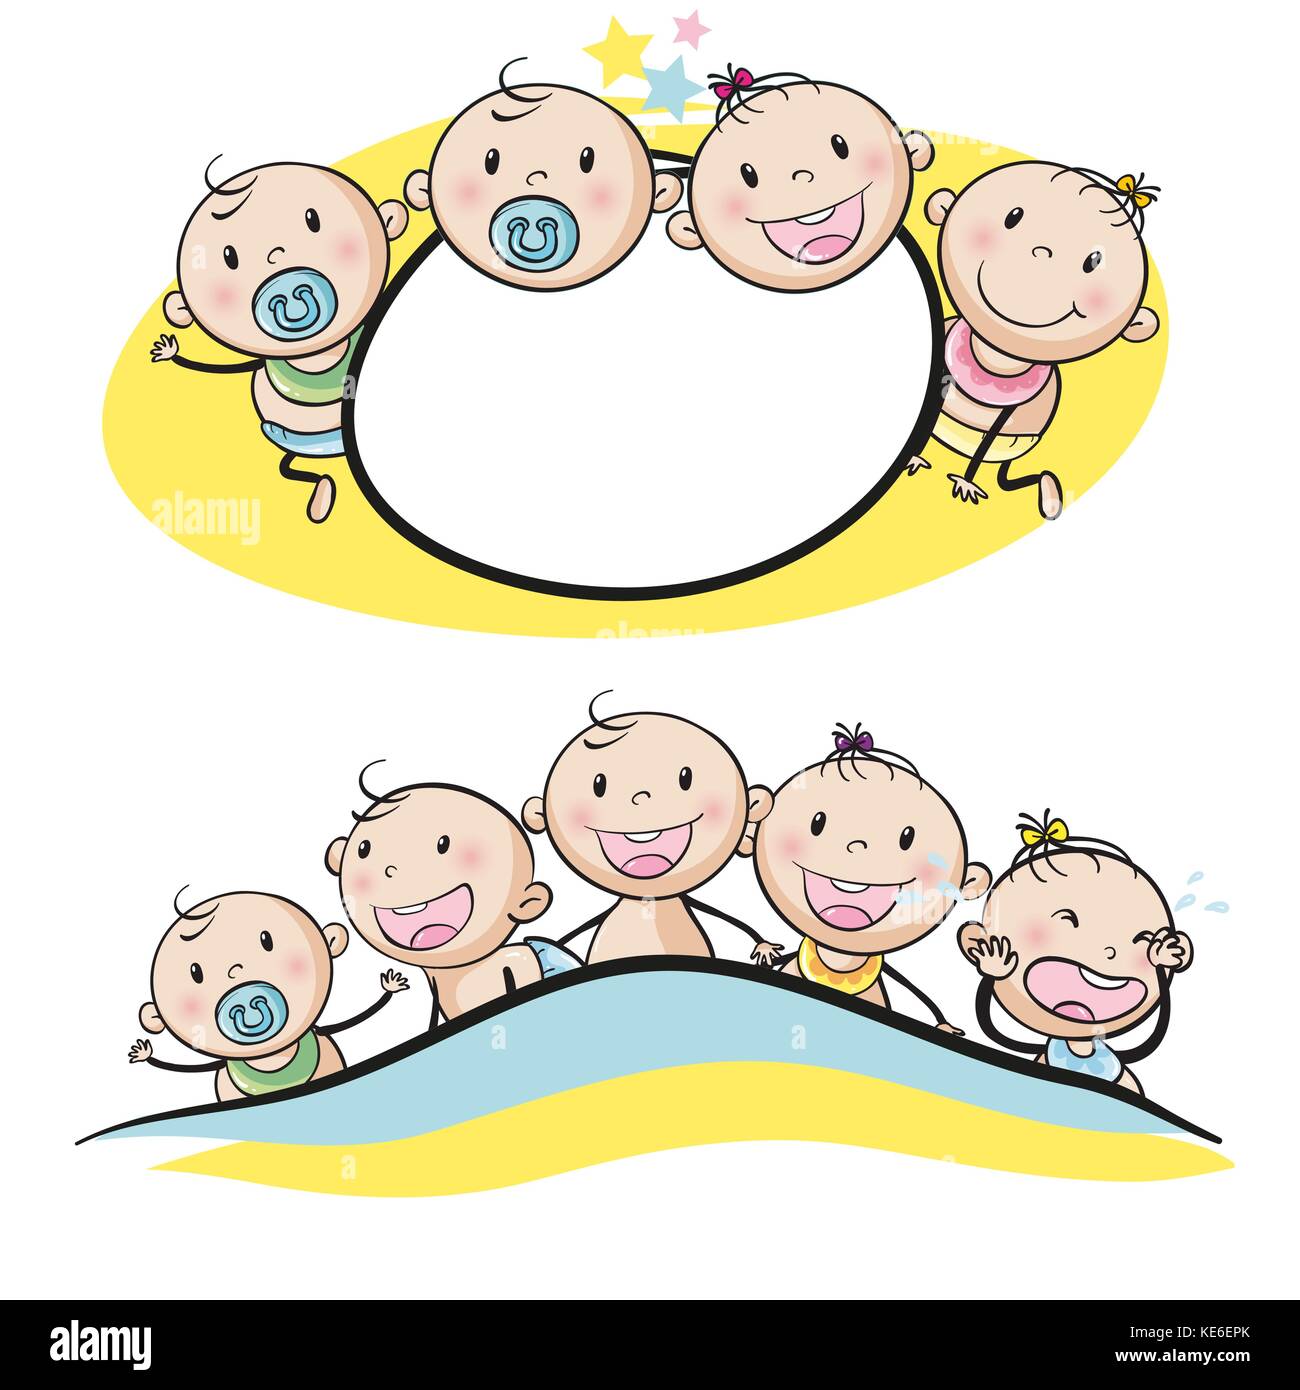 Logo design with babies smiling illustration Stock Vector